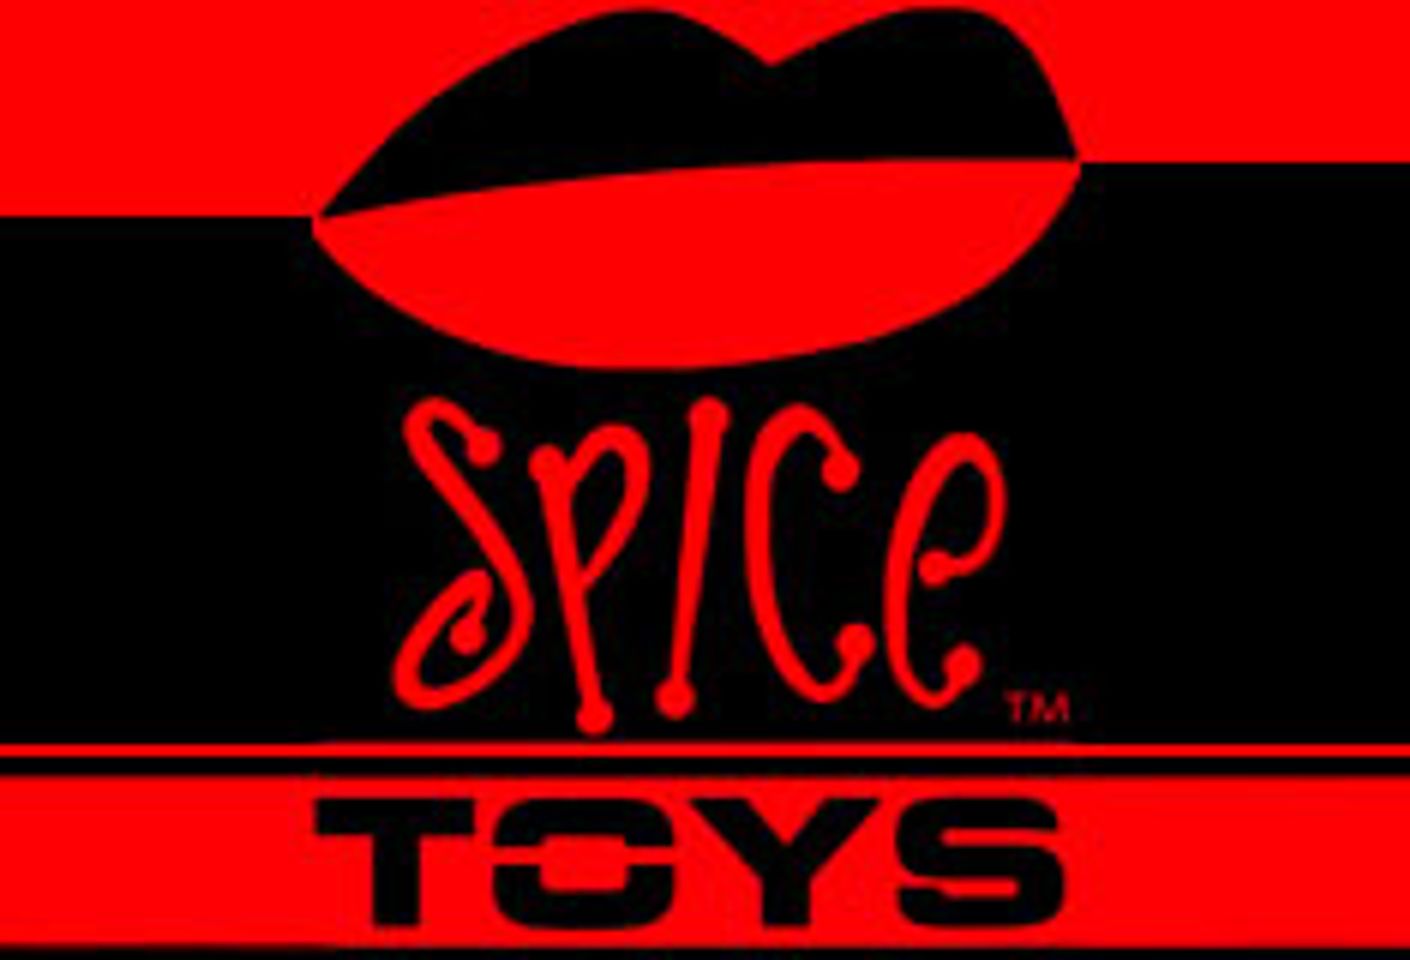 Spice Signs Licensing Deal for Novelty Collection